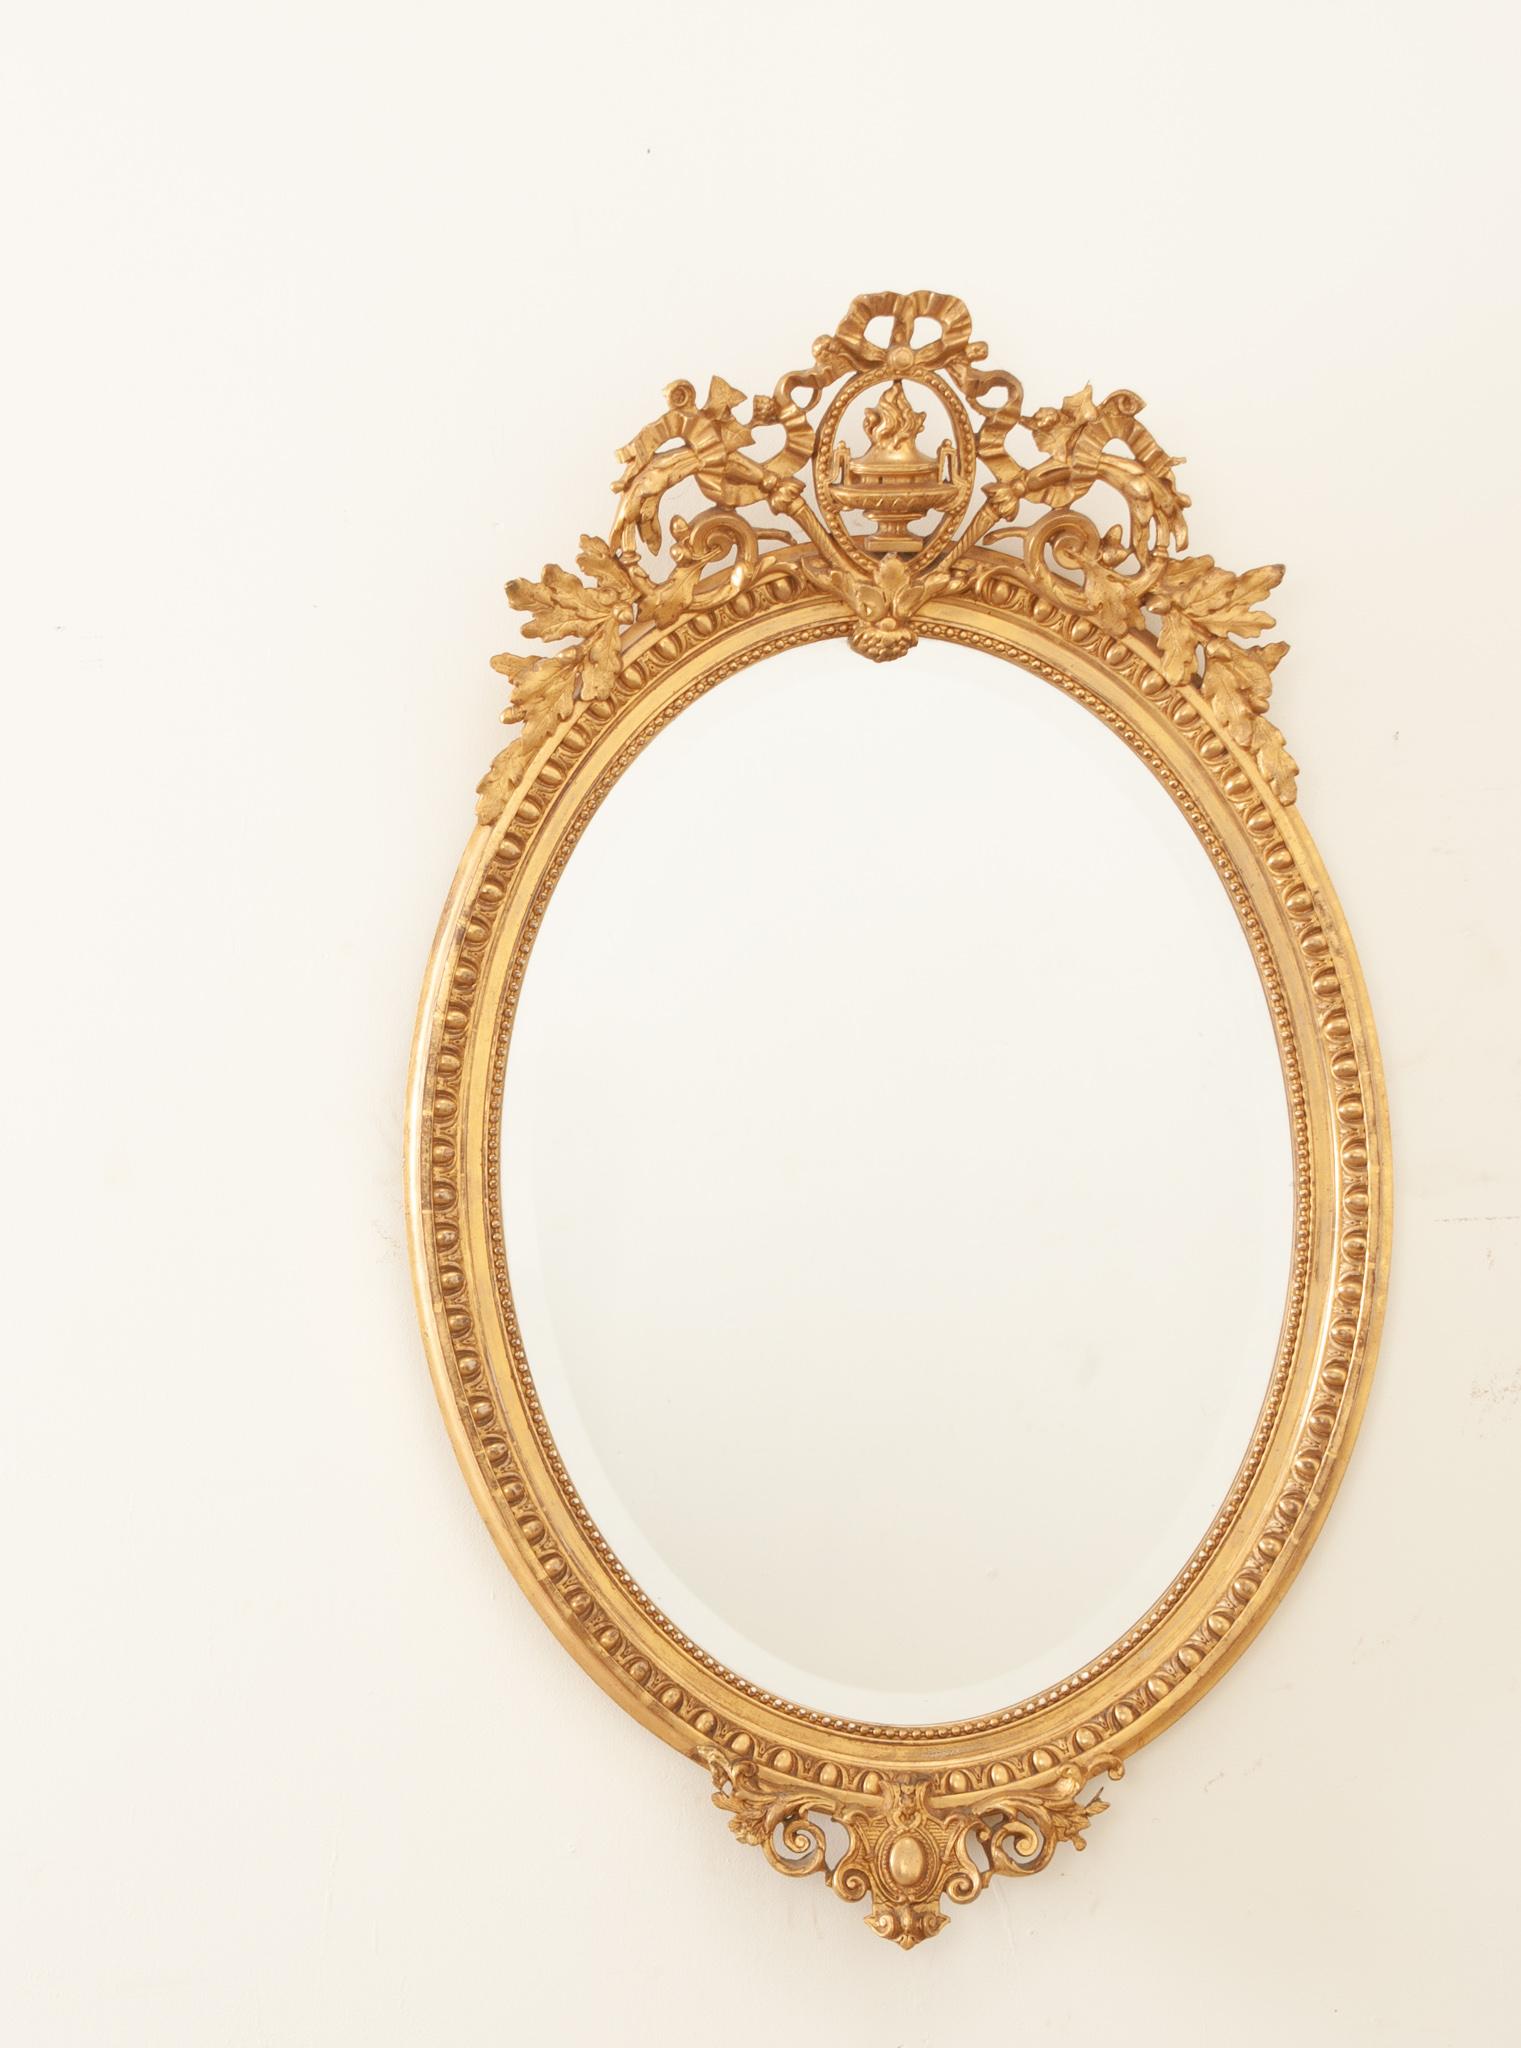 This beautiful antique gold gilt oval mirror was hand-crafted in France in the 19th century. A great example of Louis XVI style, the top ornament is a richly carved and out-sized asymmetric crest surmounted by a flambeaux-topped classical urn